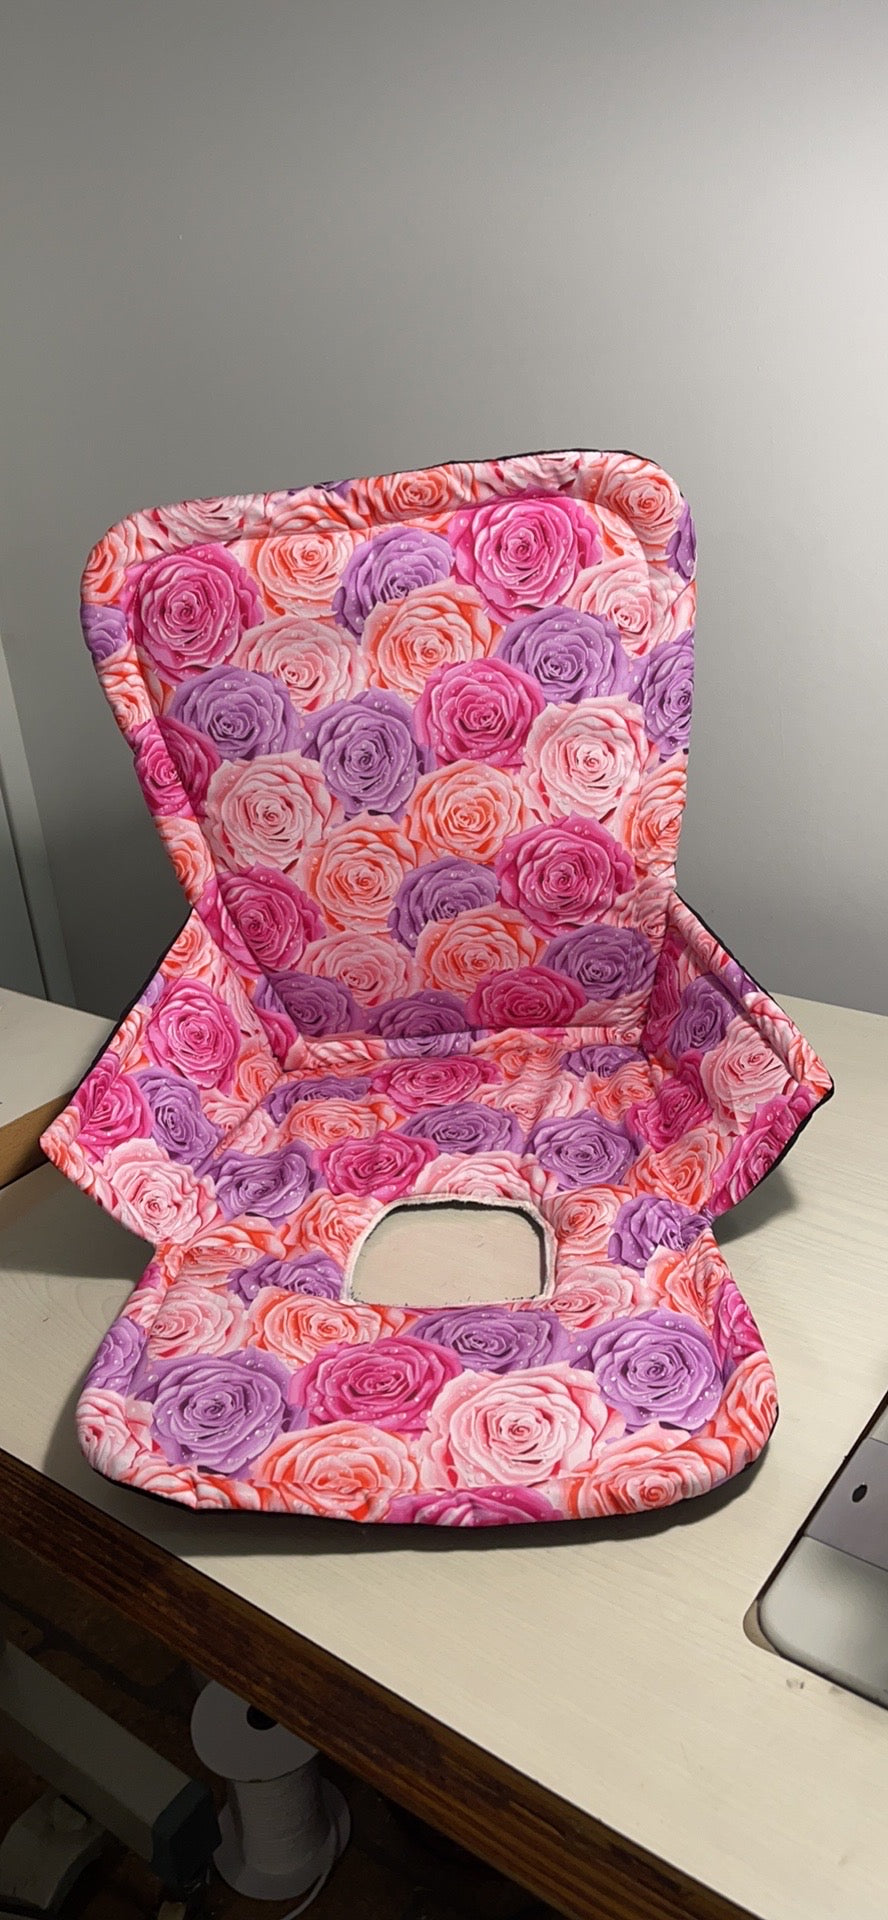 High chair covers